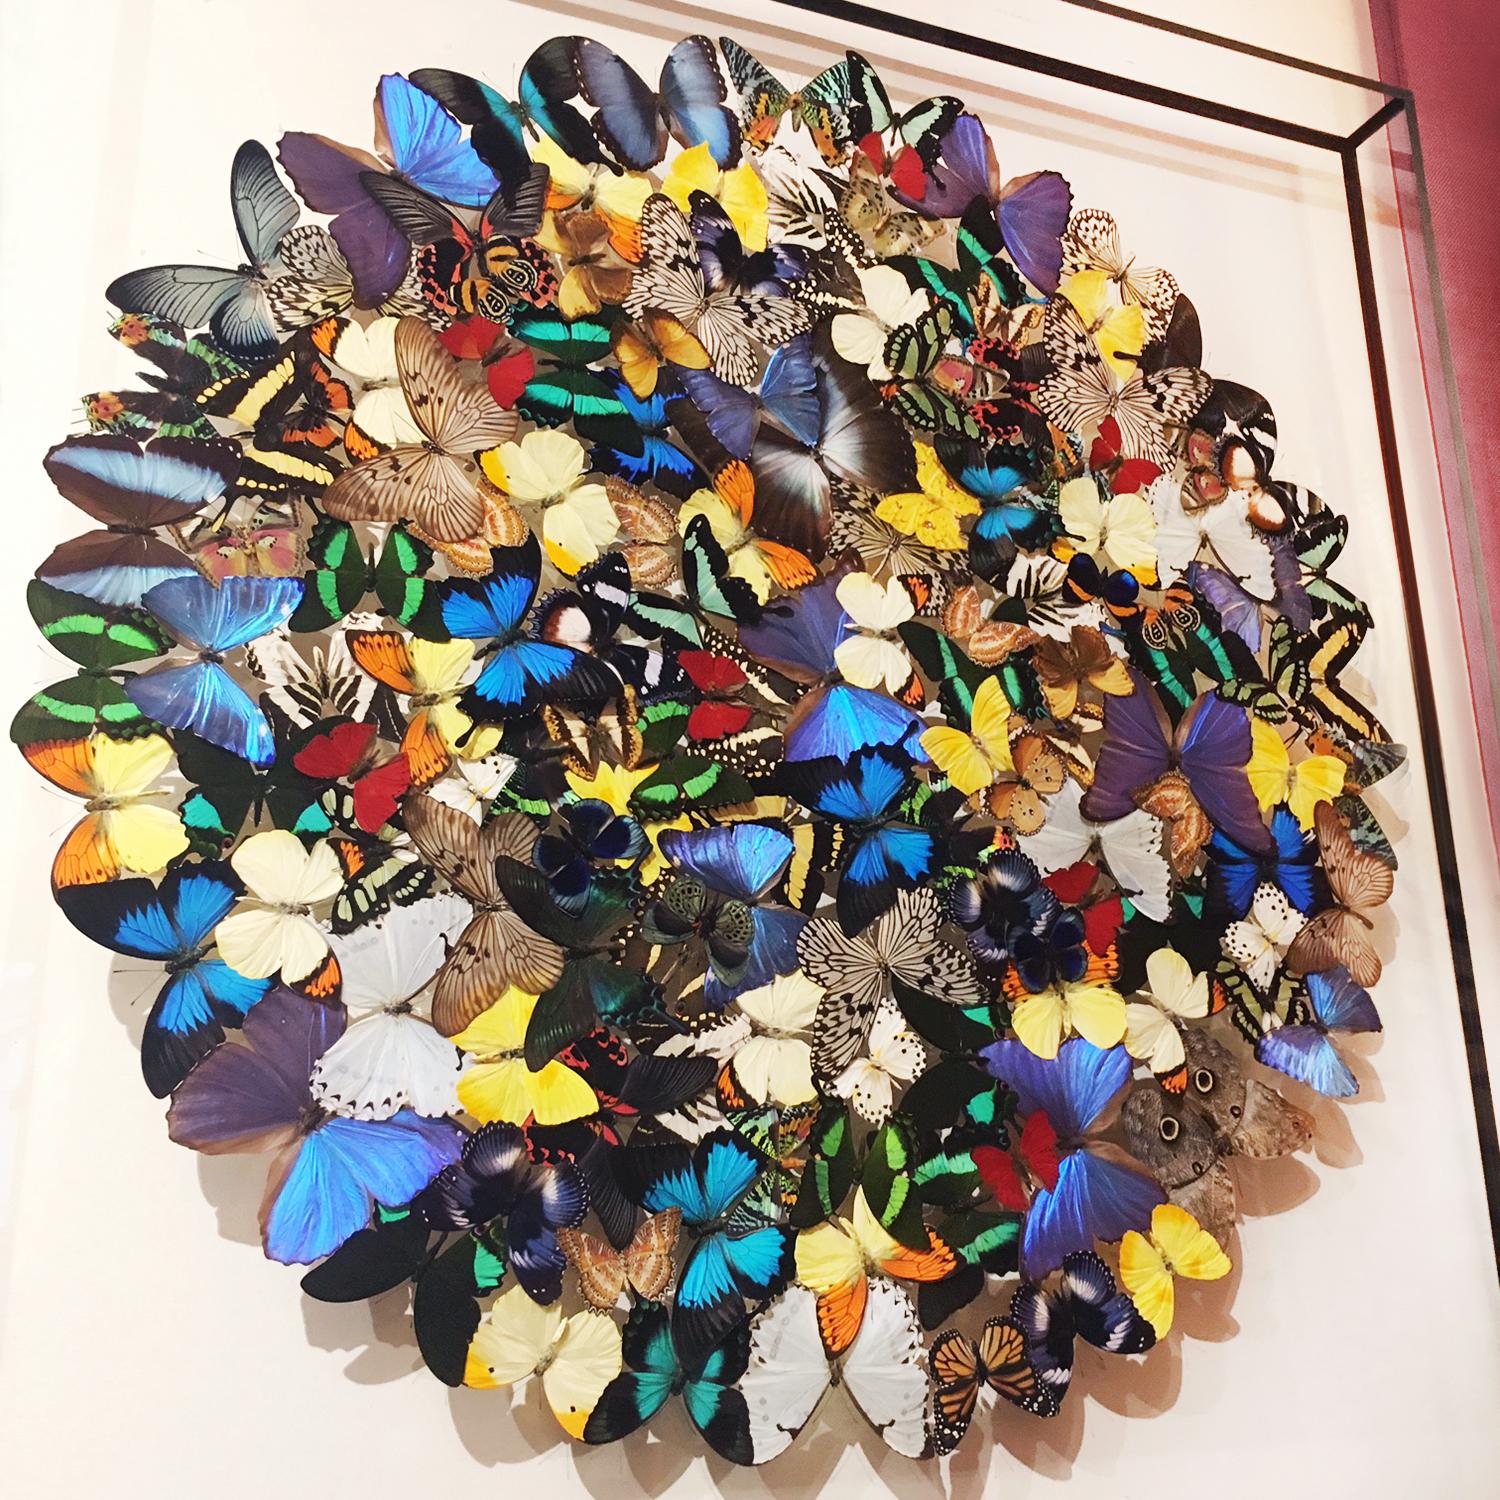 Wall Decoration Butterflies multi-colors framework
made with rare butterflies species under glass
frame box. Butterflies from breeding farms.
Exceptional and unique piece made in France.